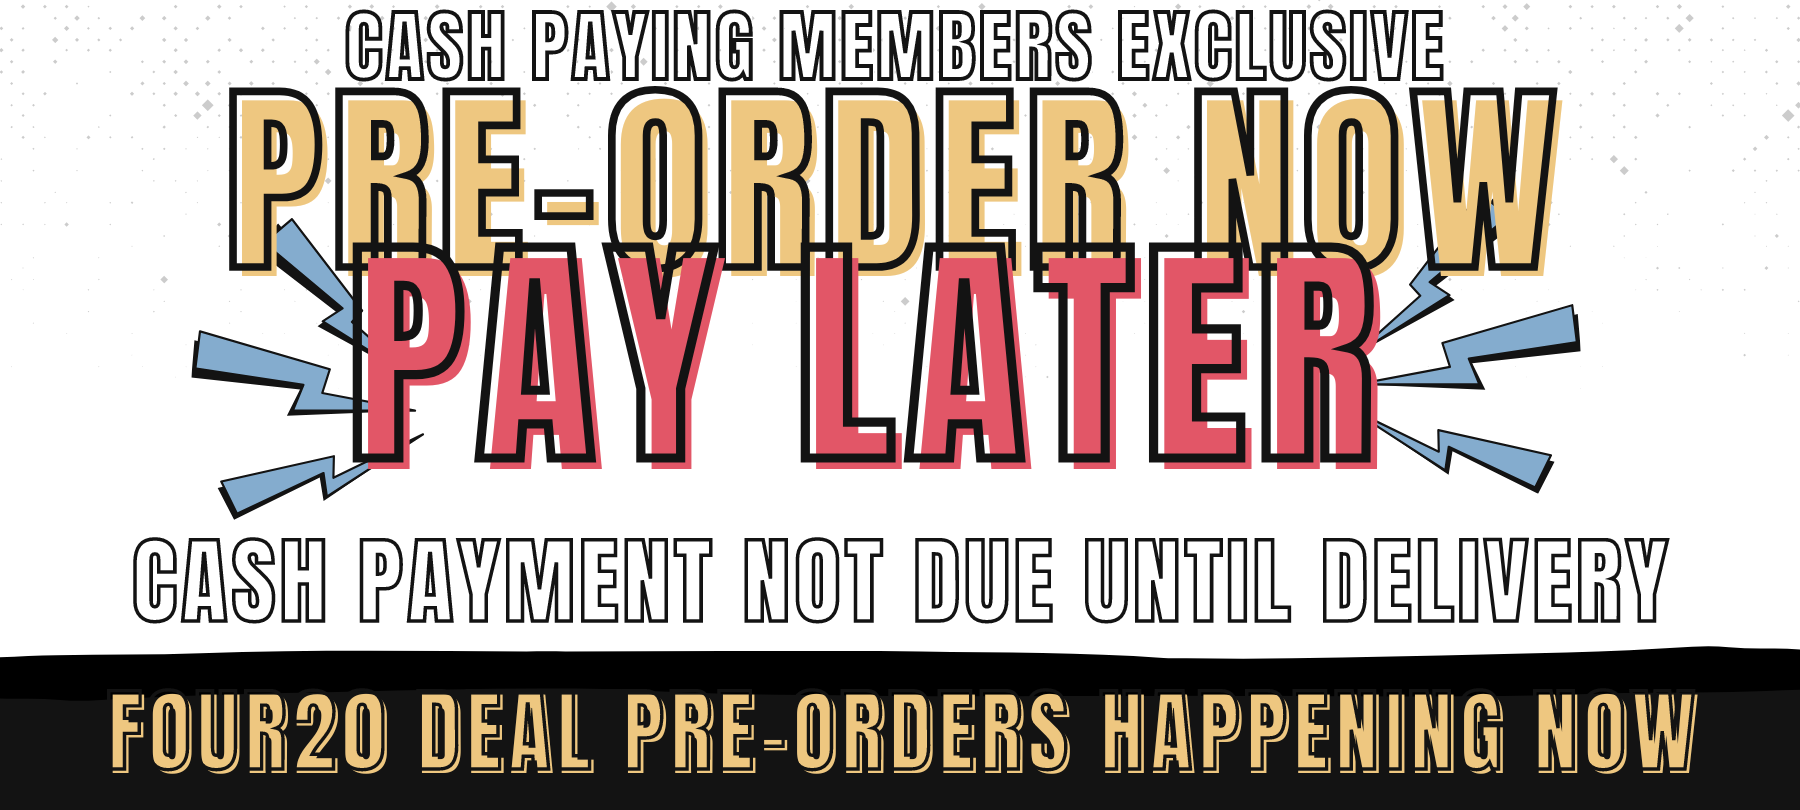 Pre-Order Now, Pay Later! Cash paying members don't have to pay until they get their delivery